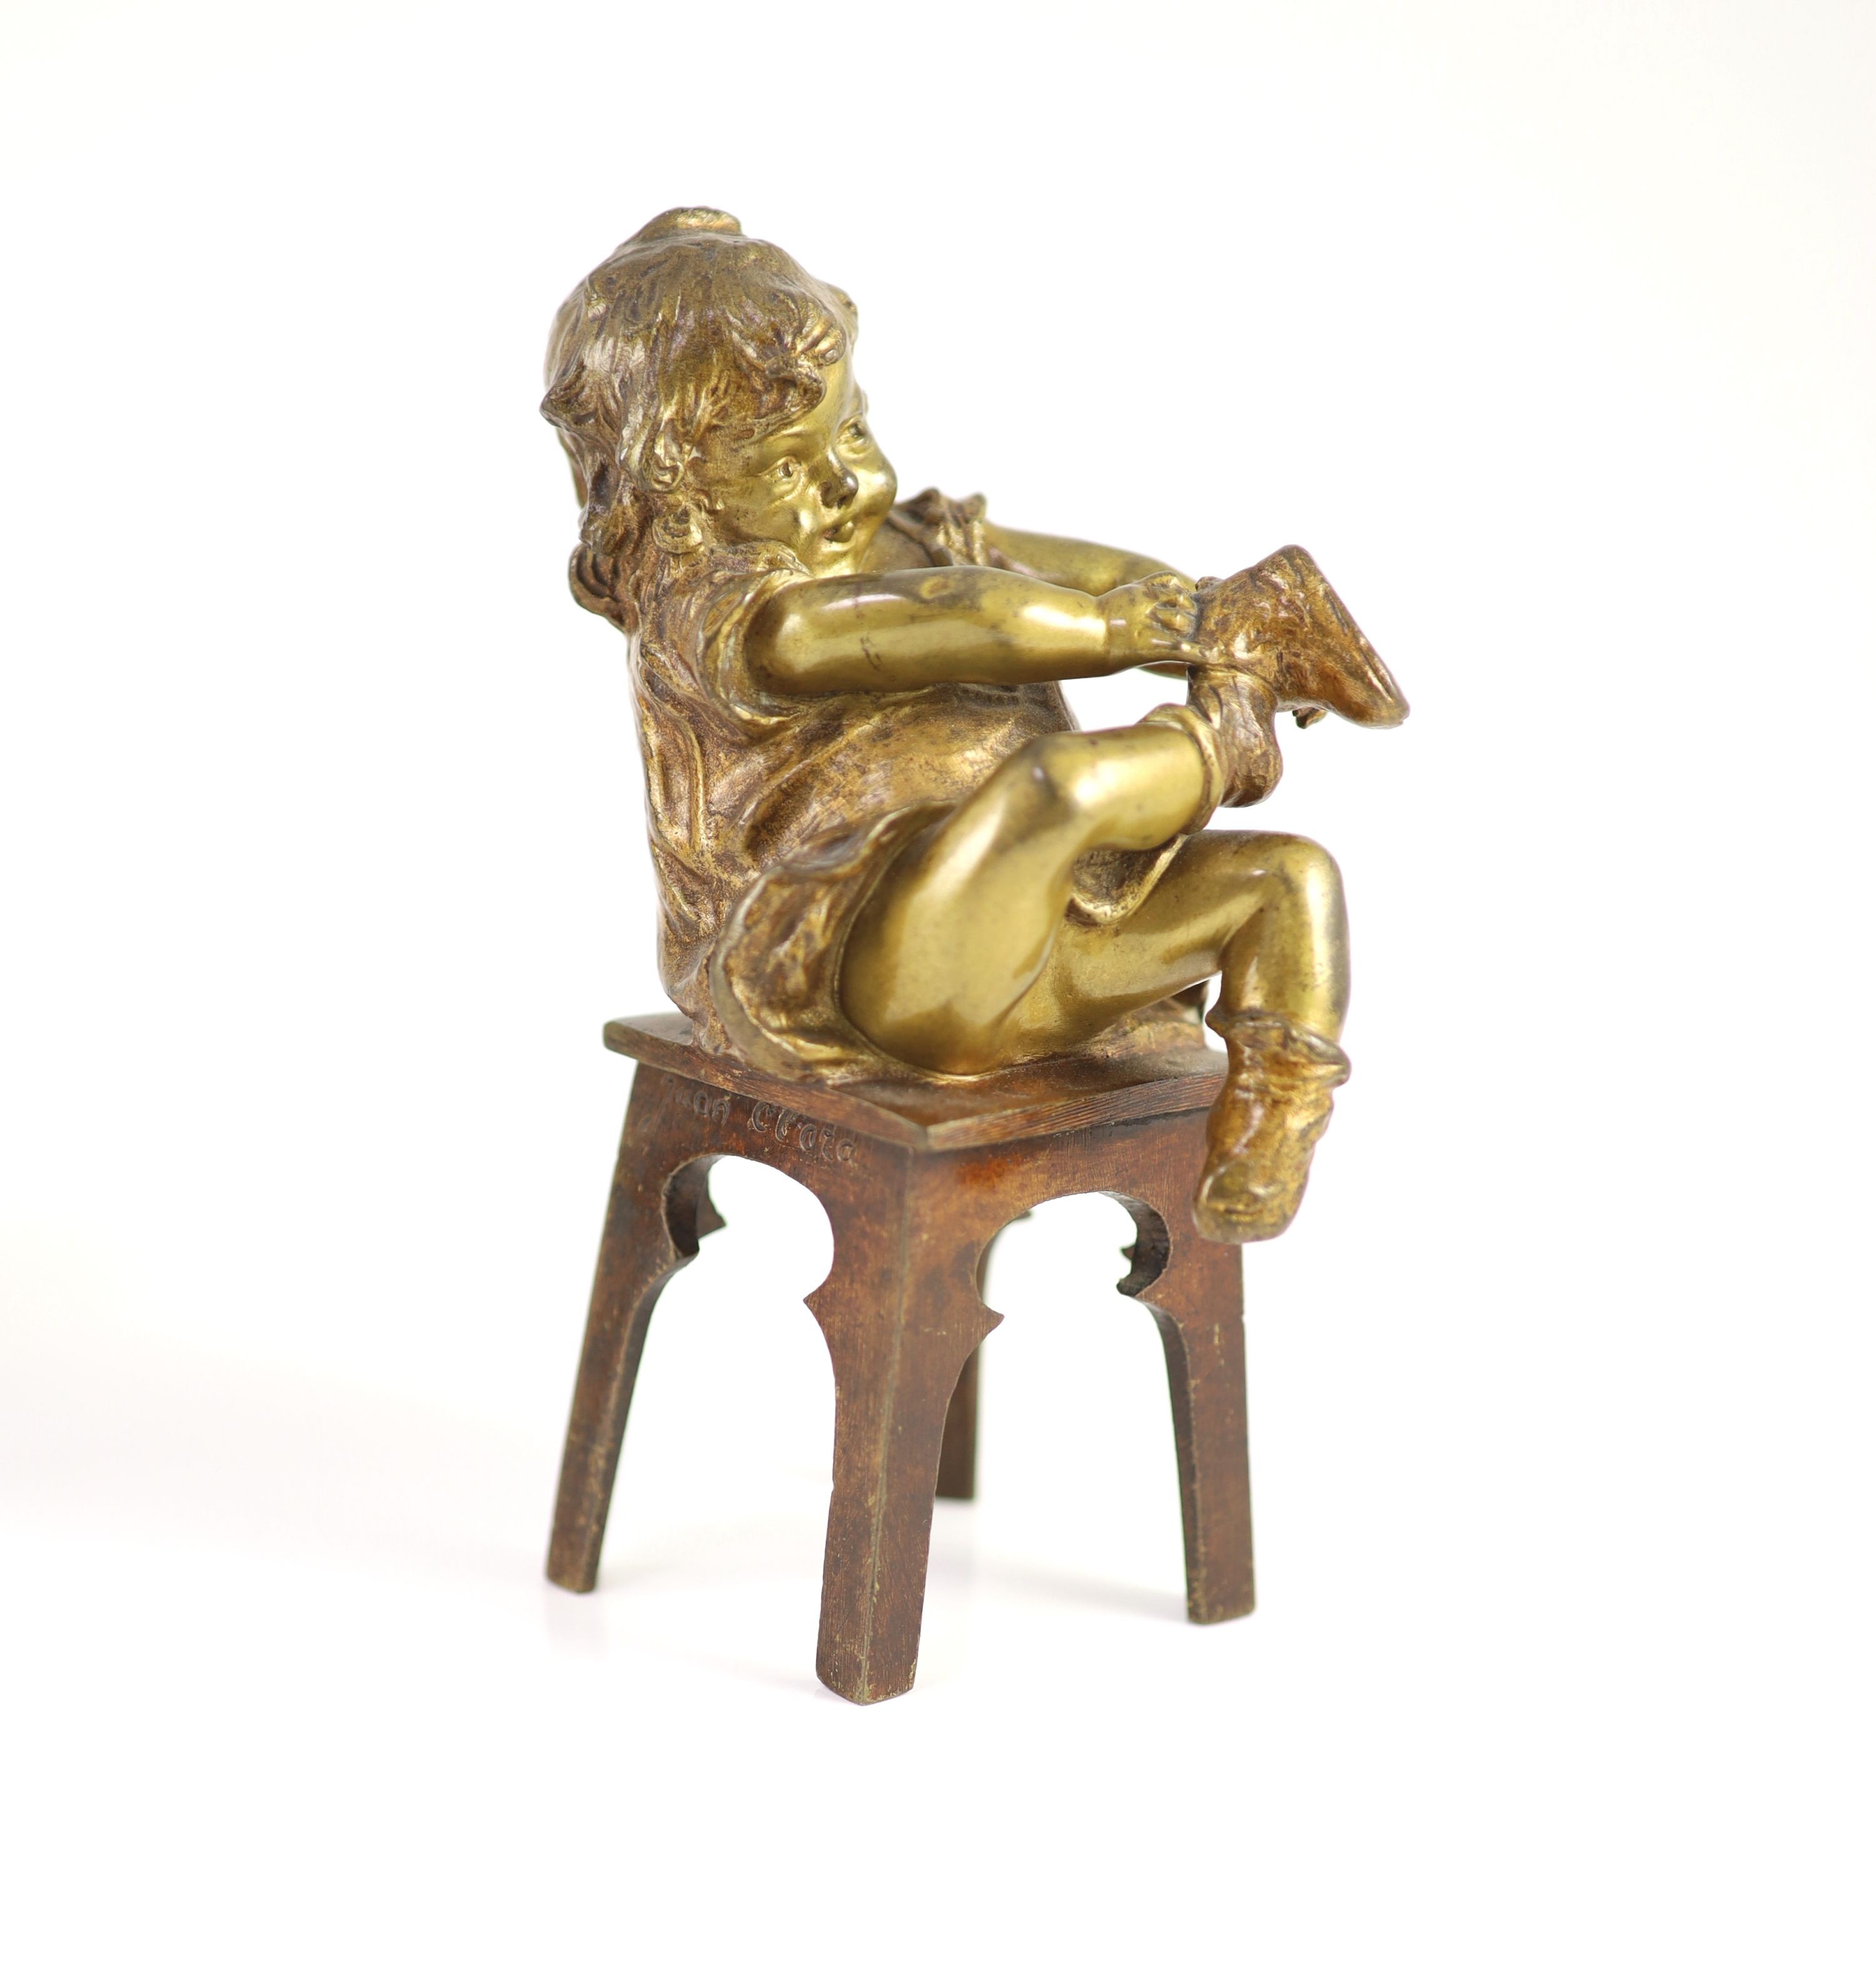 After Joan Clarà (1875 - 1958). A pair of bronze models of girls playing on chairs, height 15.5cm